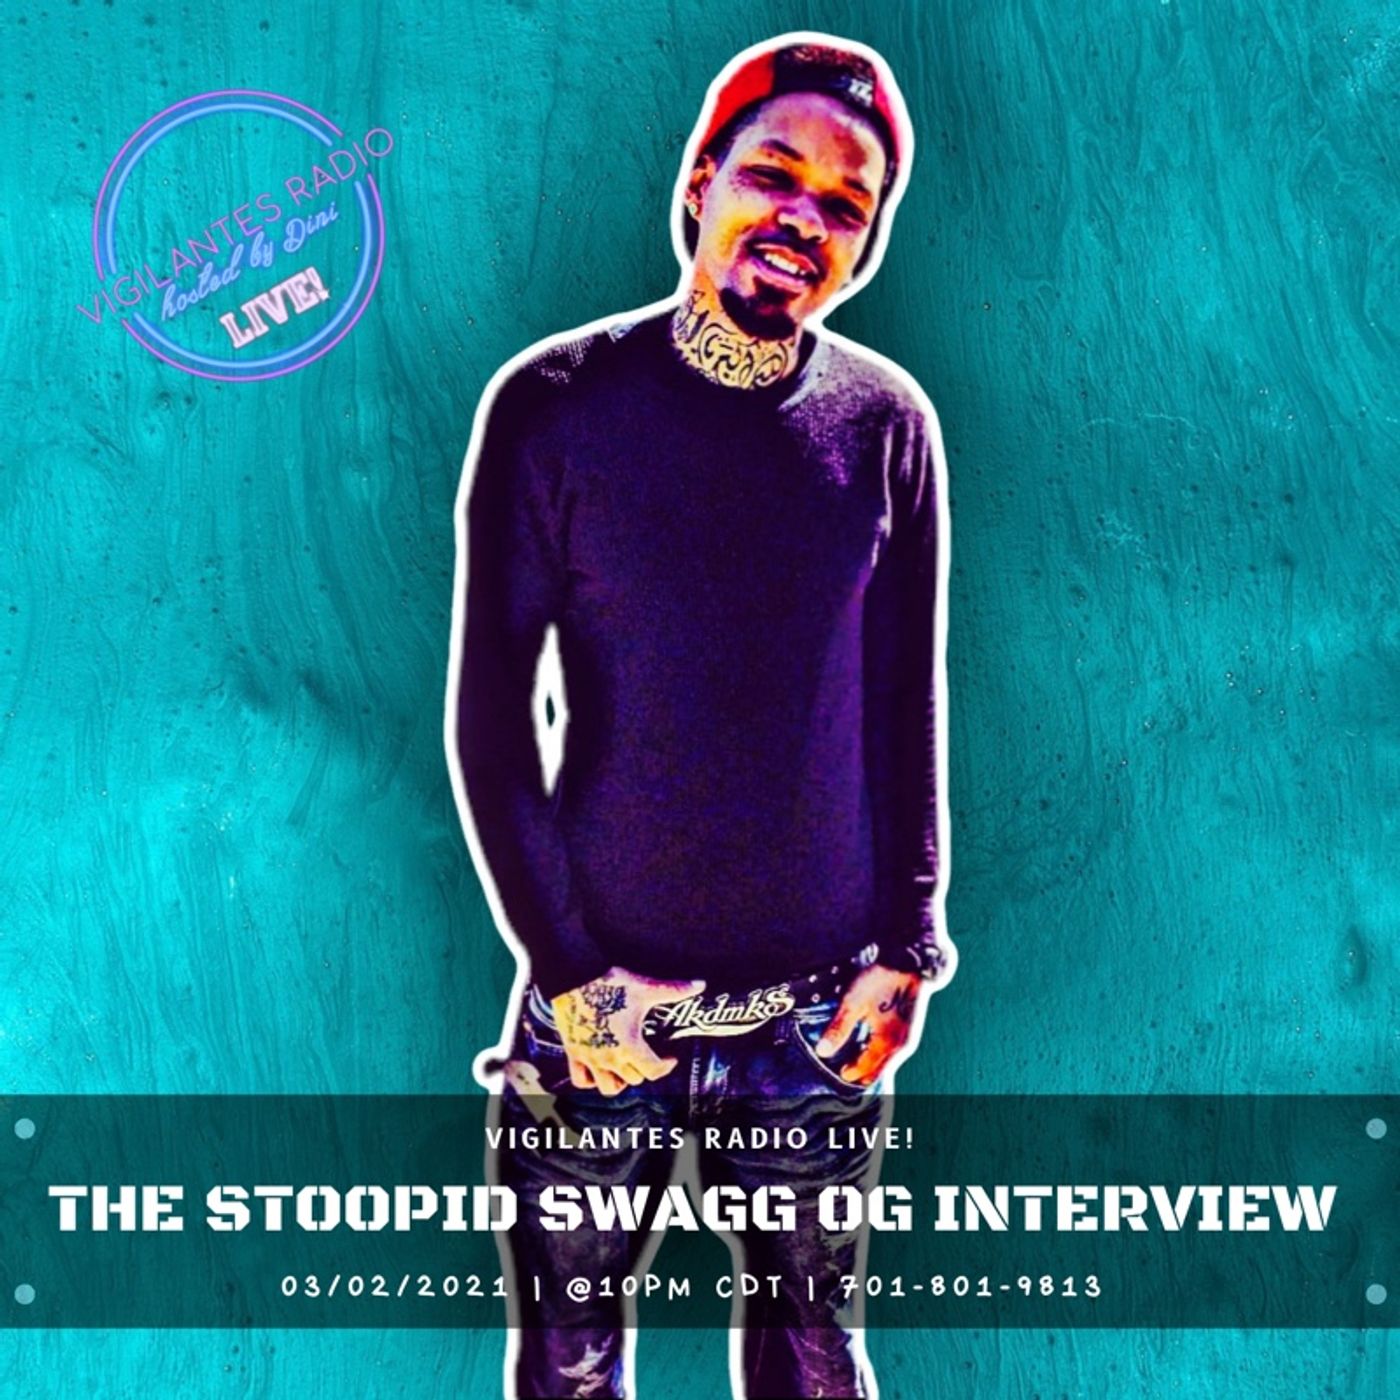 The Stoopid Swagg OG Interview. Image